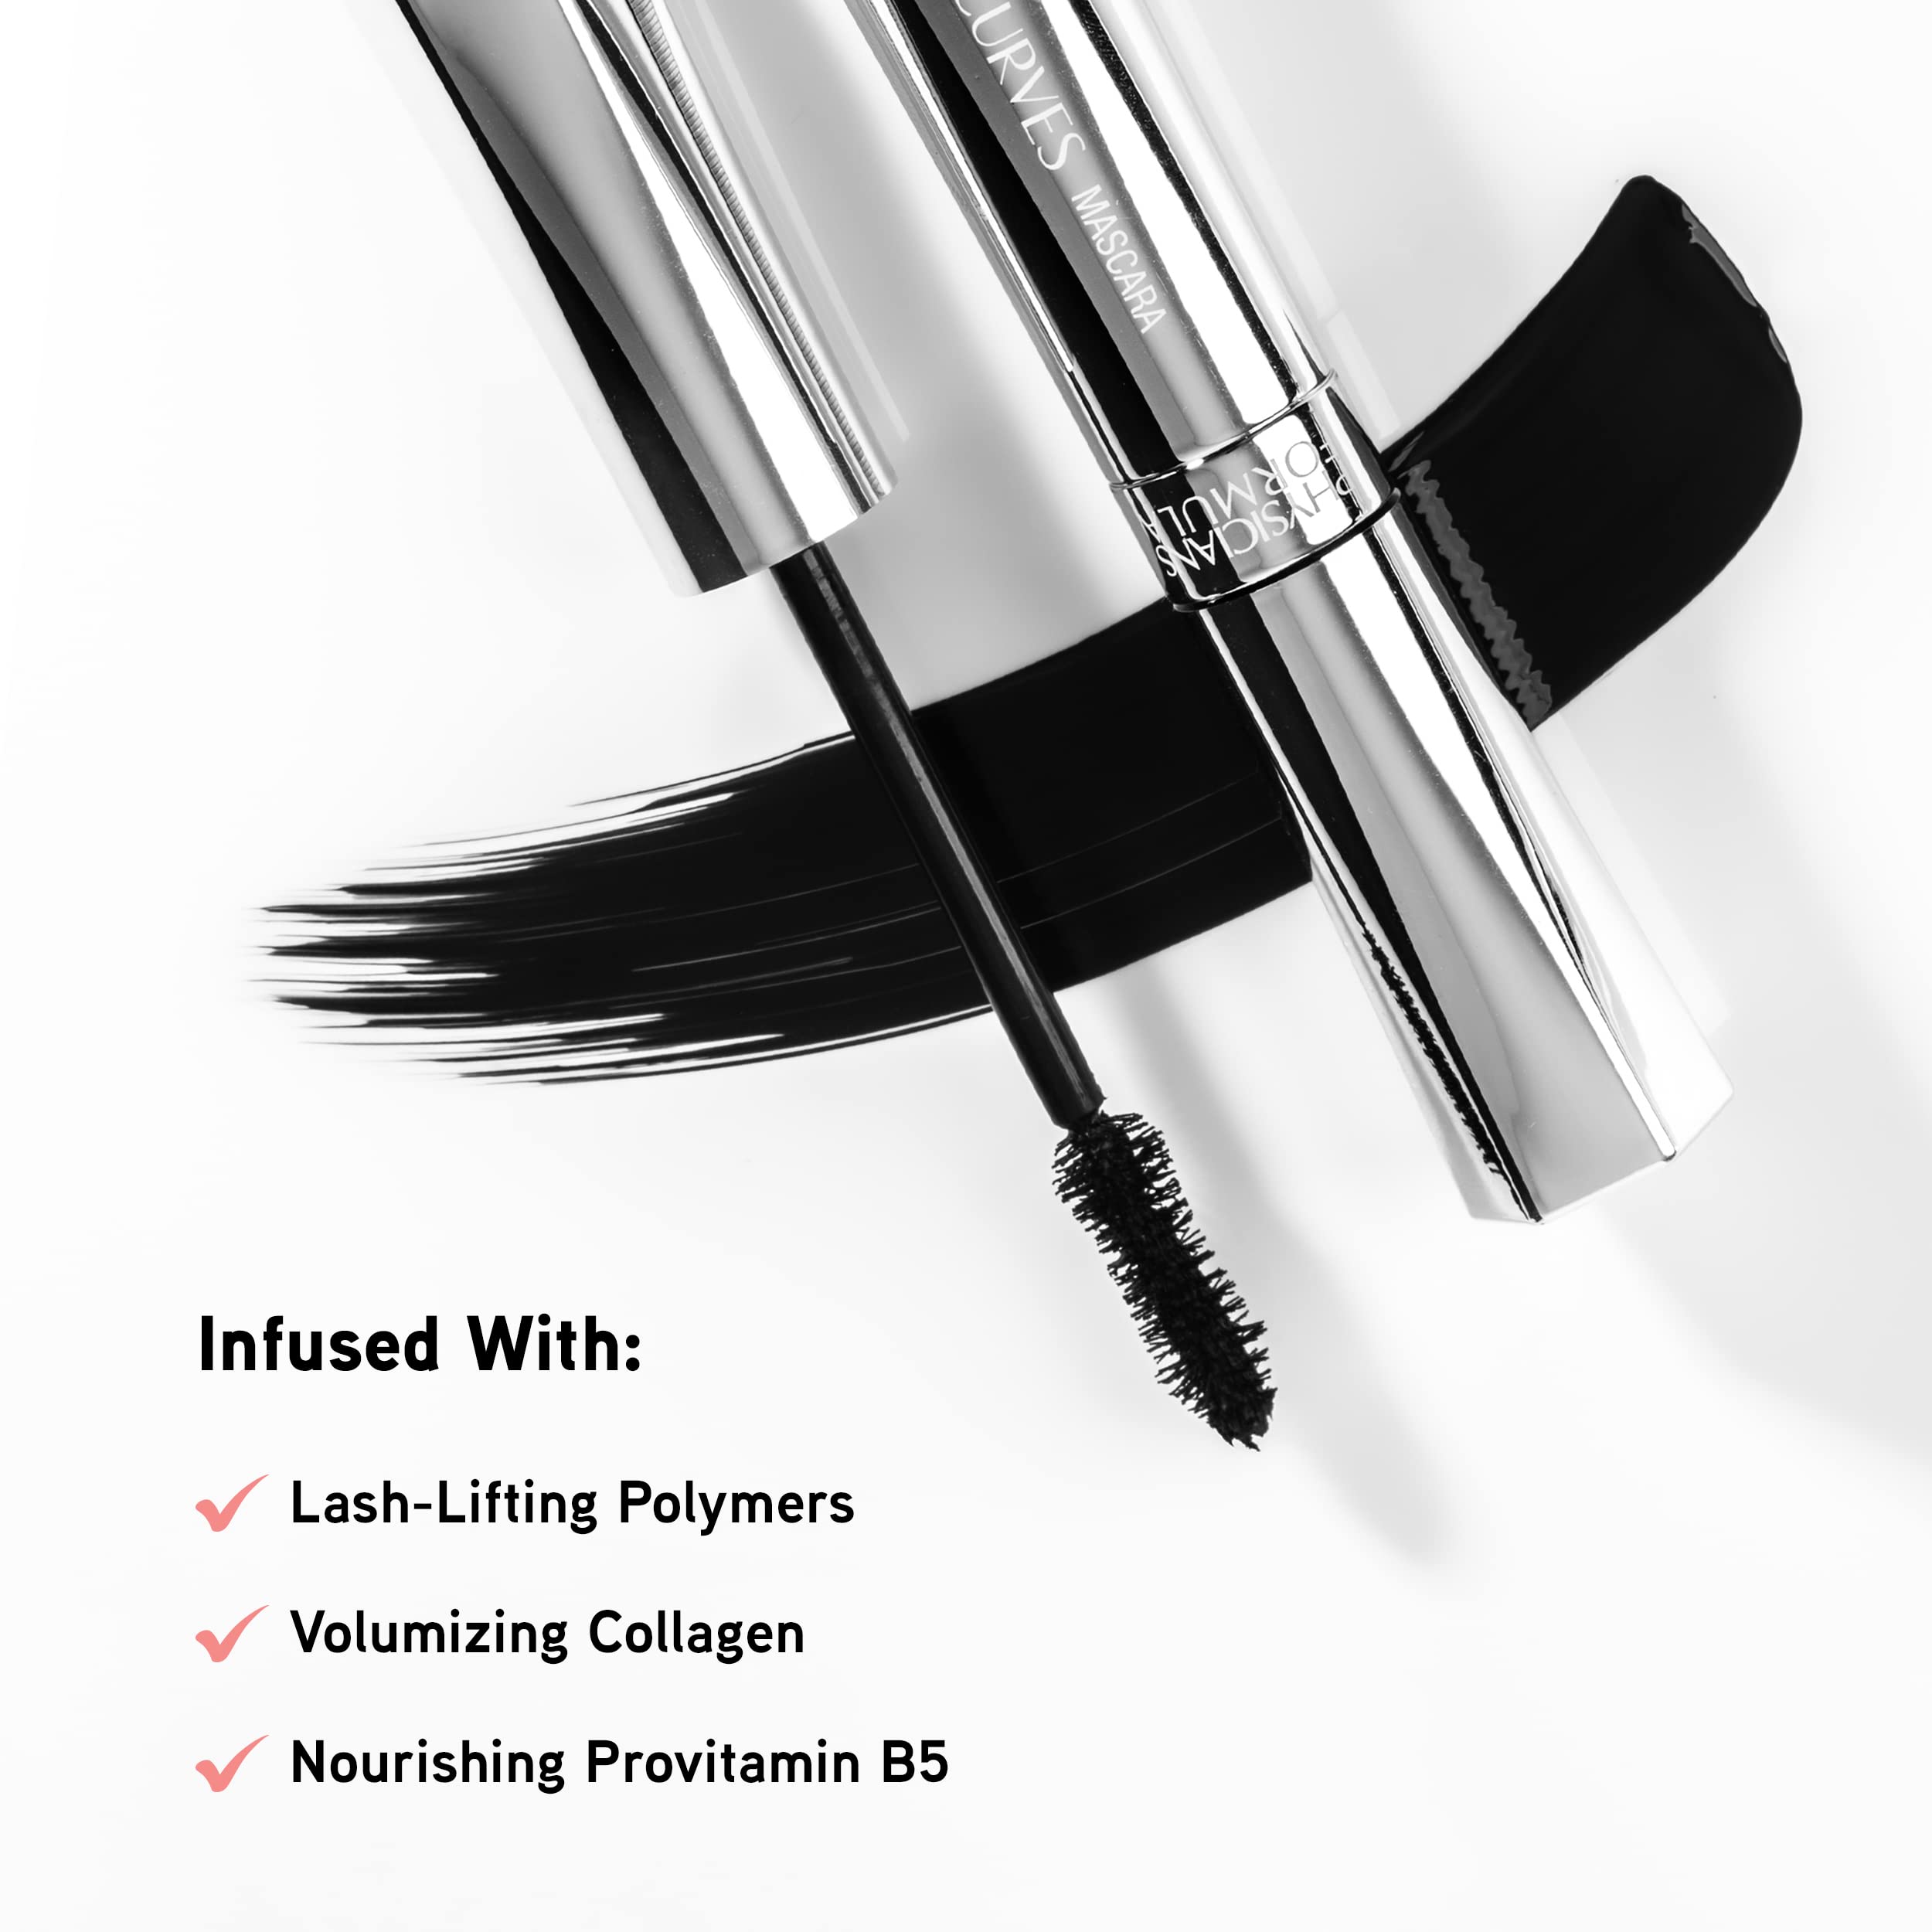 Physicians Formula Killer Curves Curling Mascara, Black, Full-Volume Lash-Lifting, Dermatologist Approved, Clinically Tested, Ophthalmologist Approved, Cruelty Free, Vegan